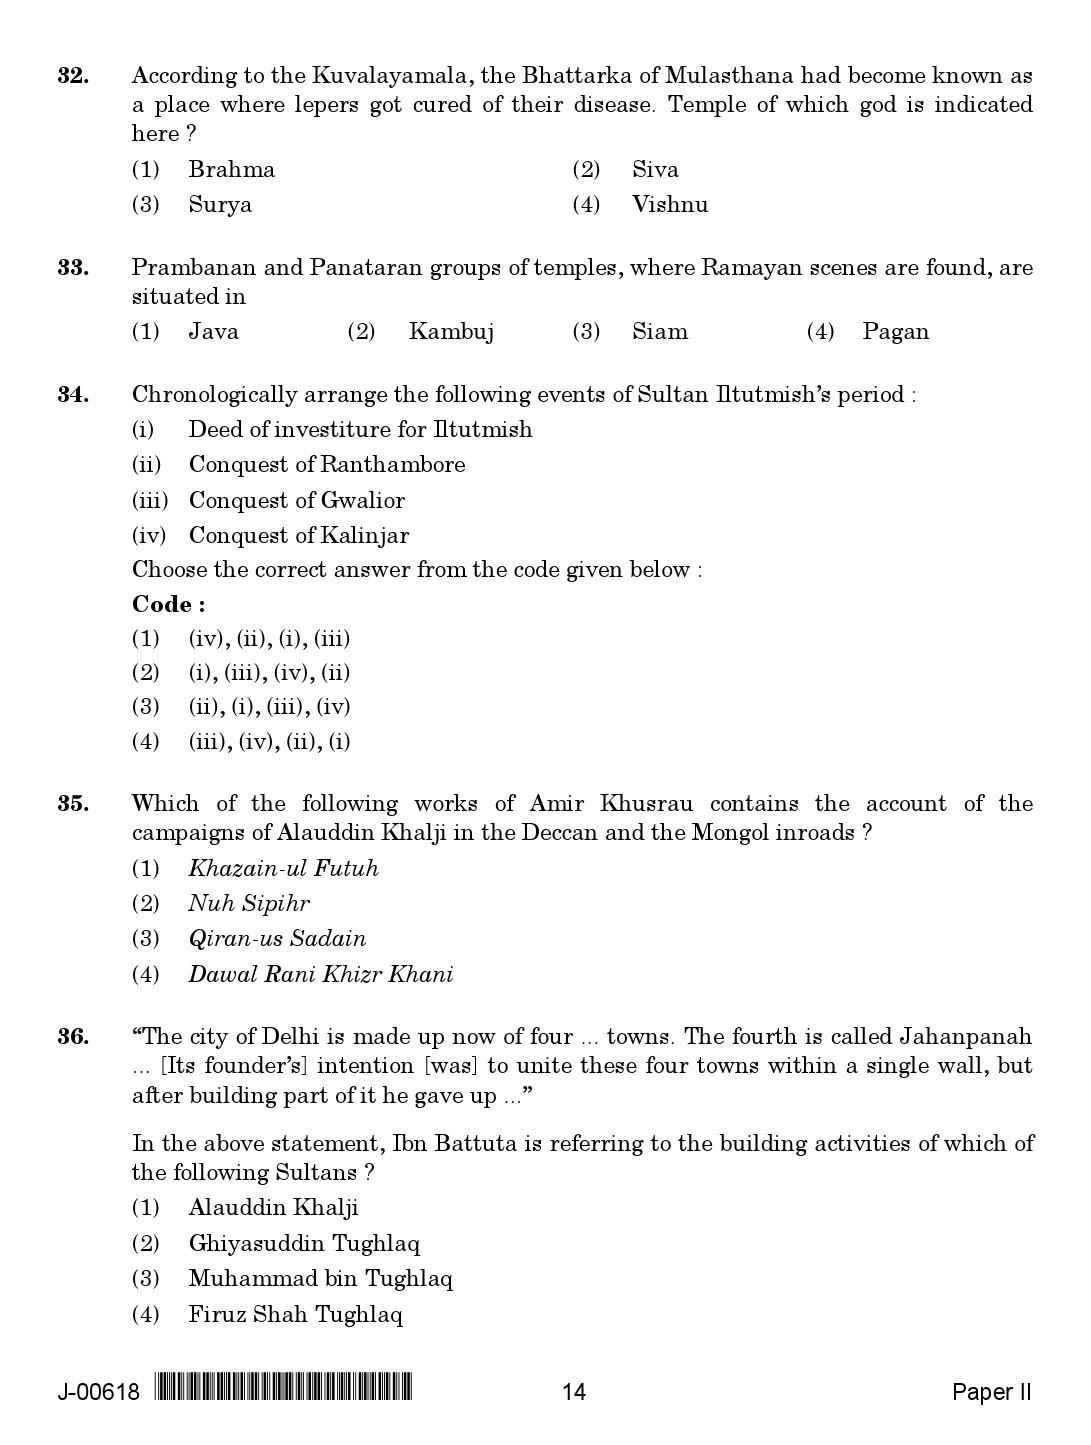 History Question Paper II July 2018 in English 2nd Exam 8